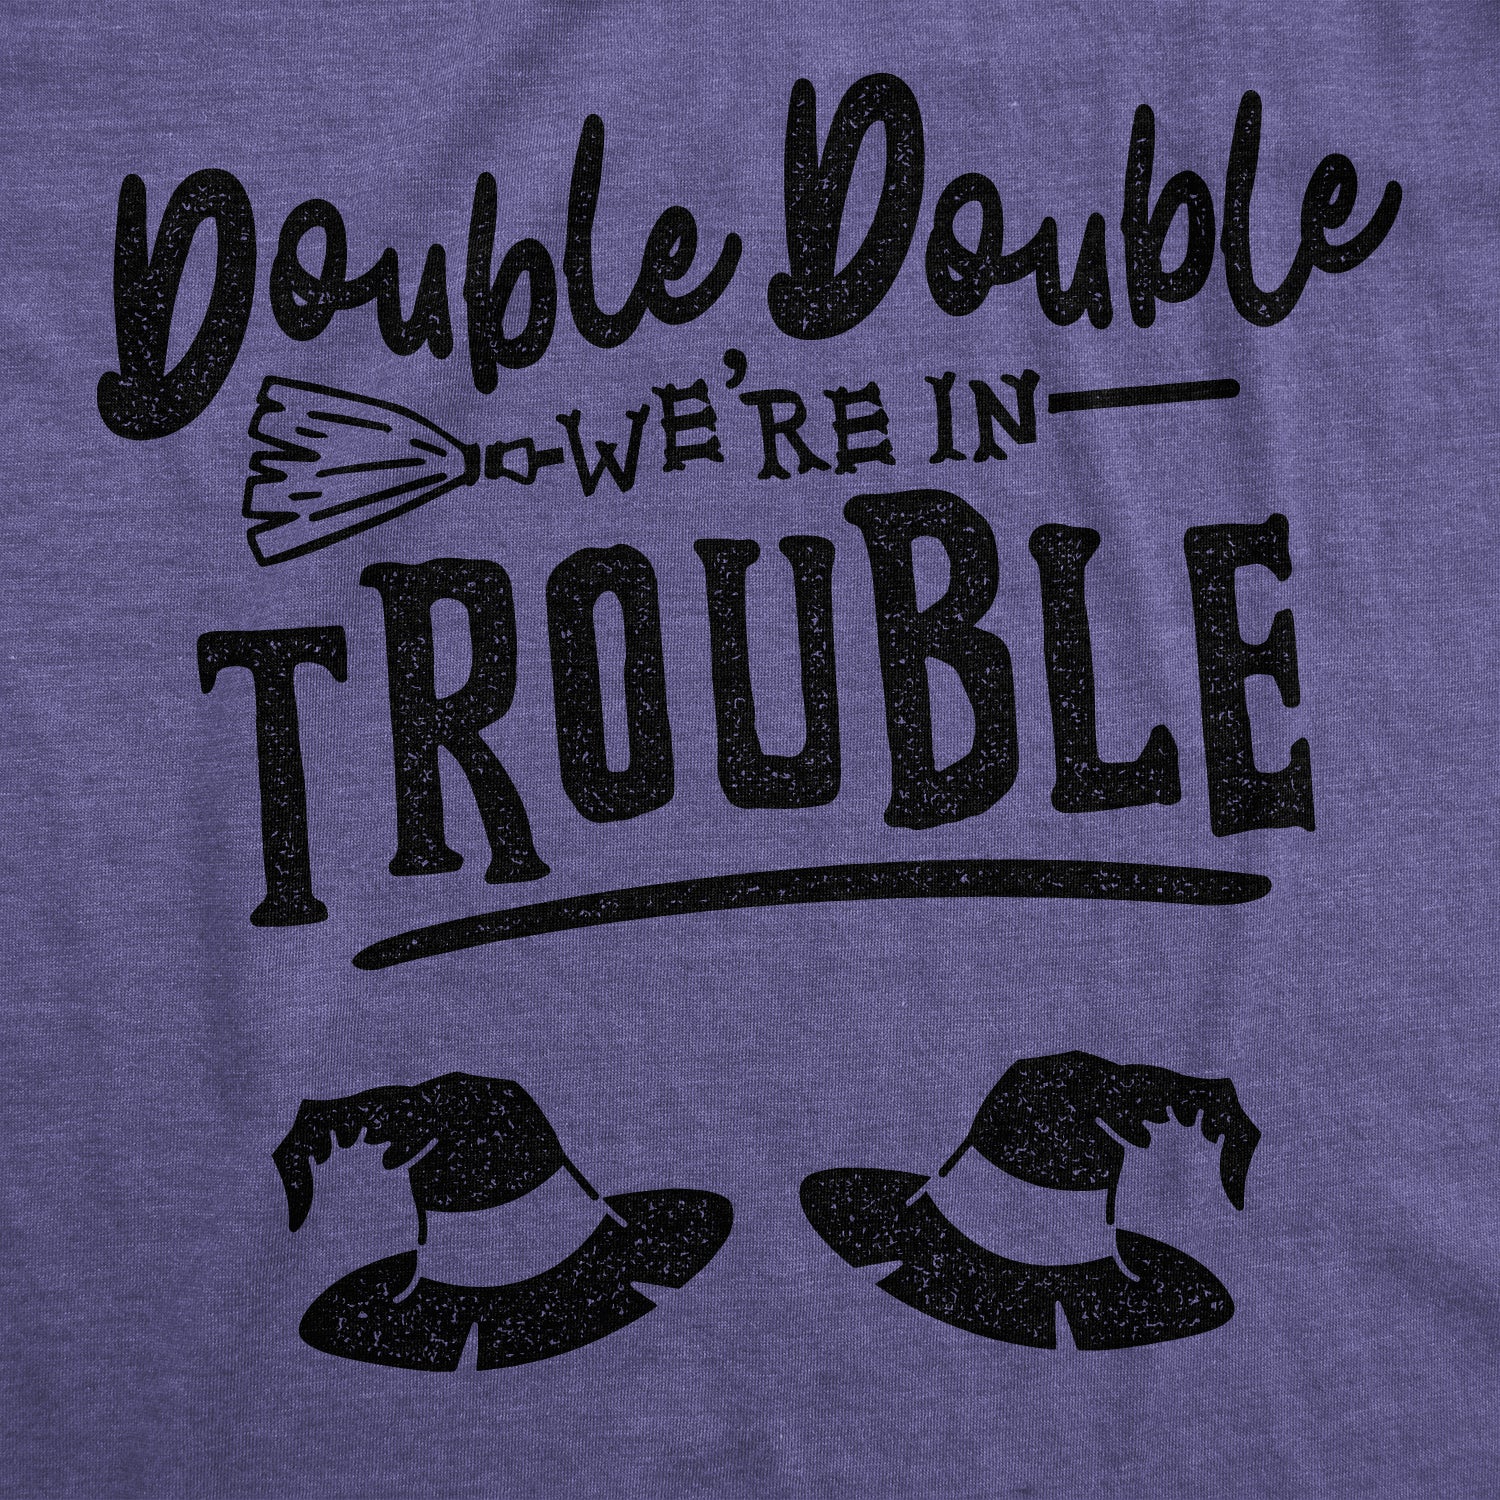 Funny Heather Purple Double Double We're In Trouble Maternity T Shirt Nerdy Halloween Tee